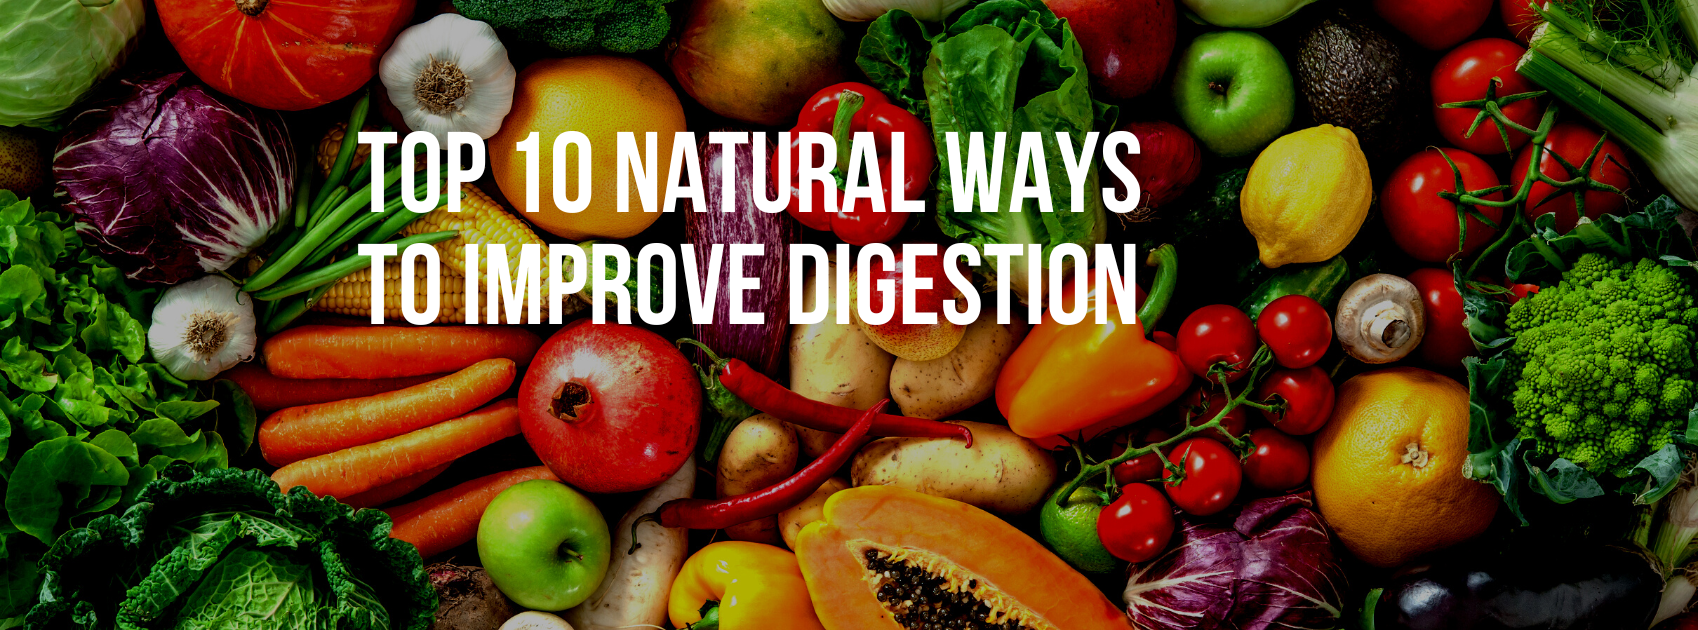 Top 10 Natural Ways To Improve Digestion